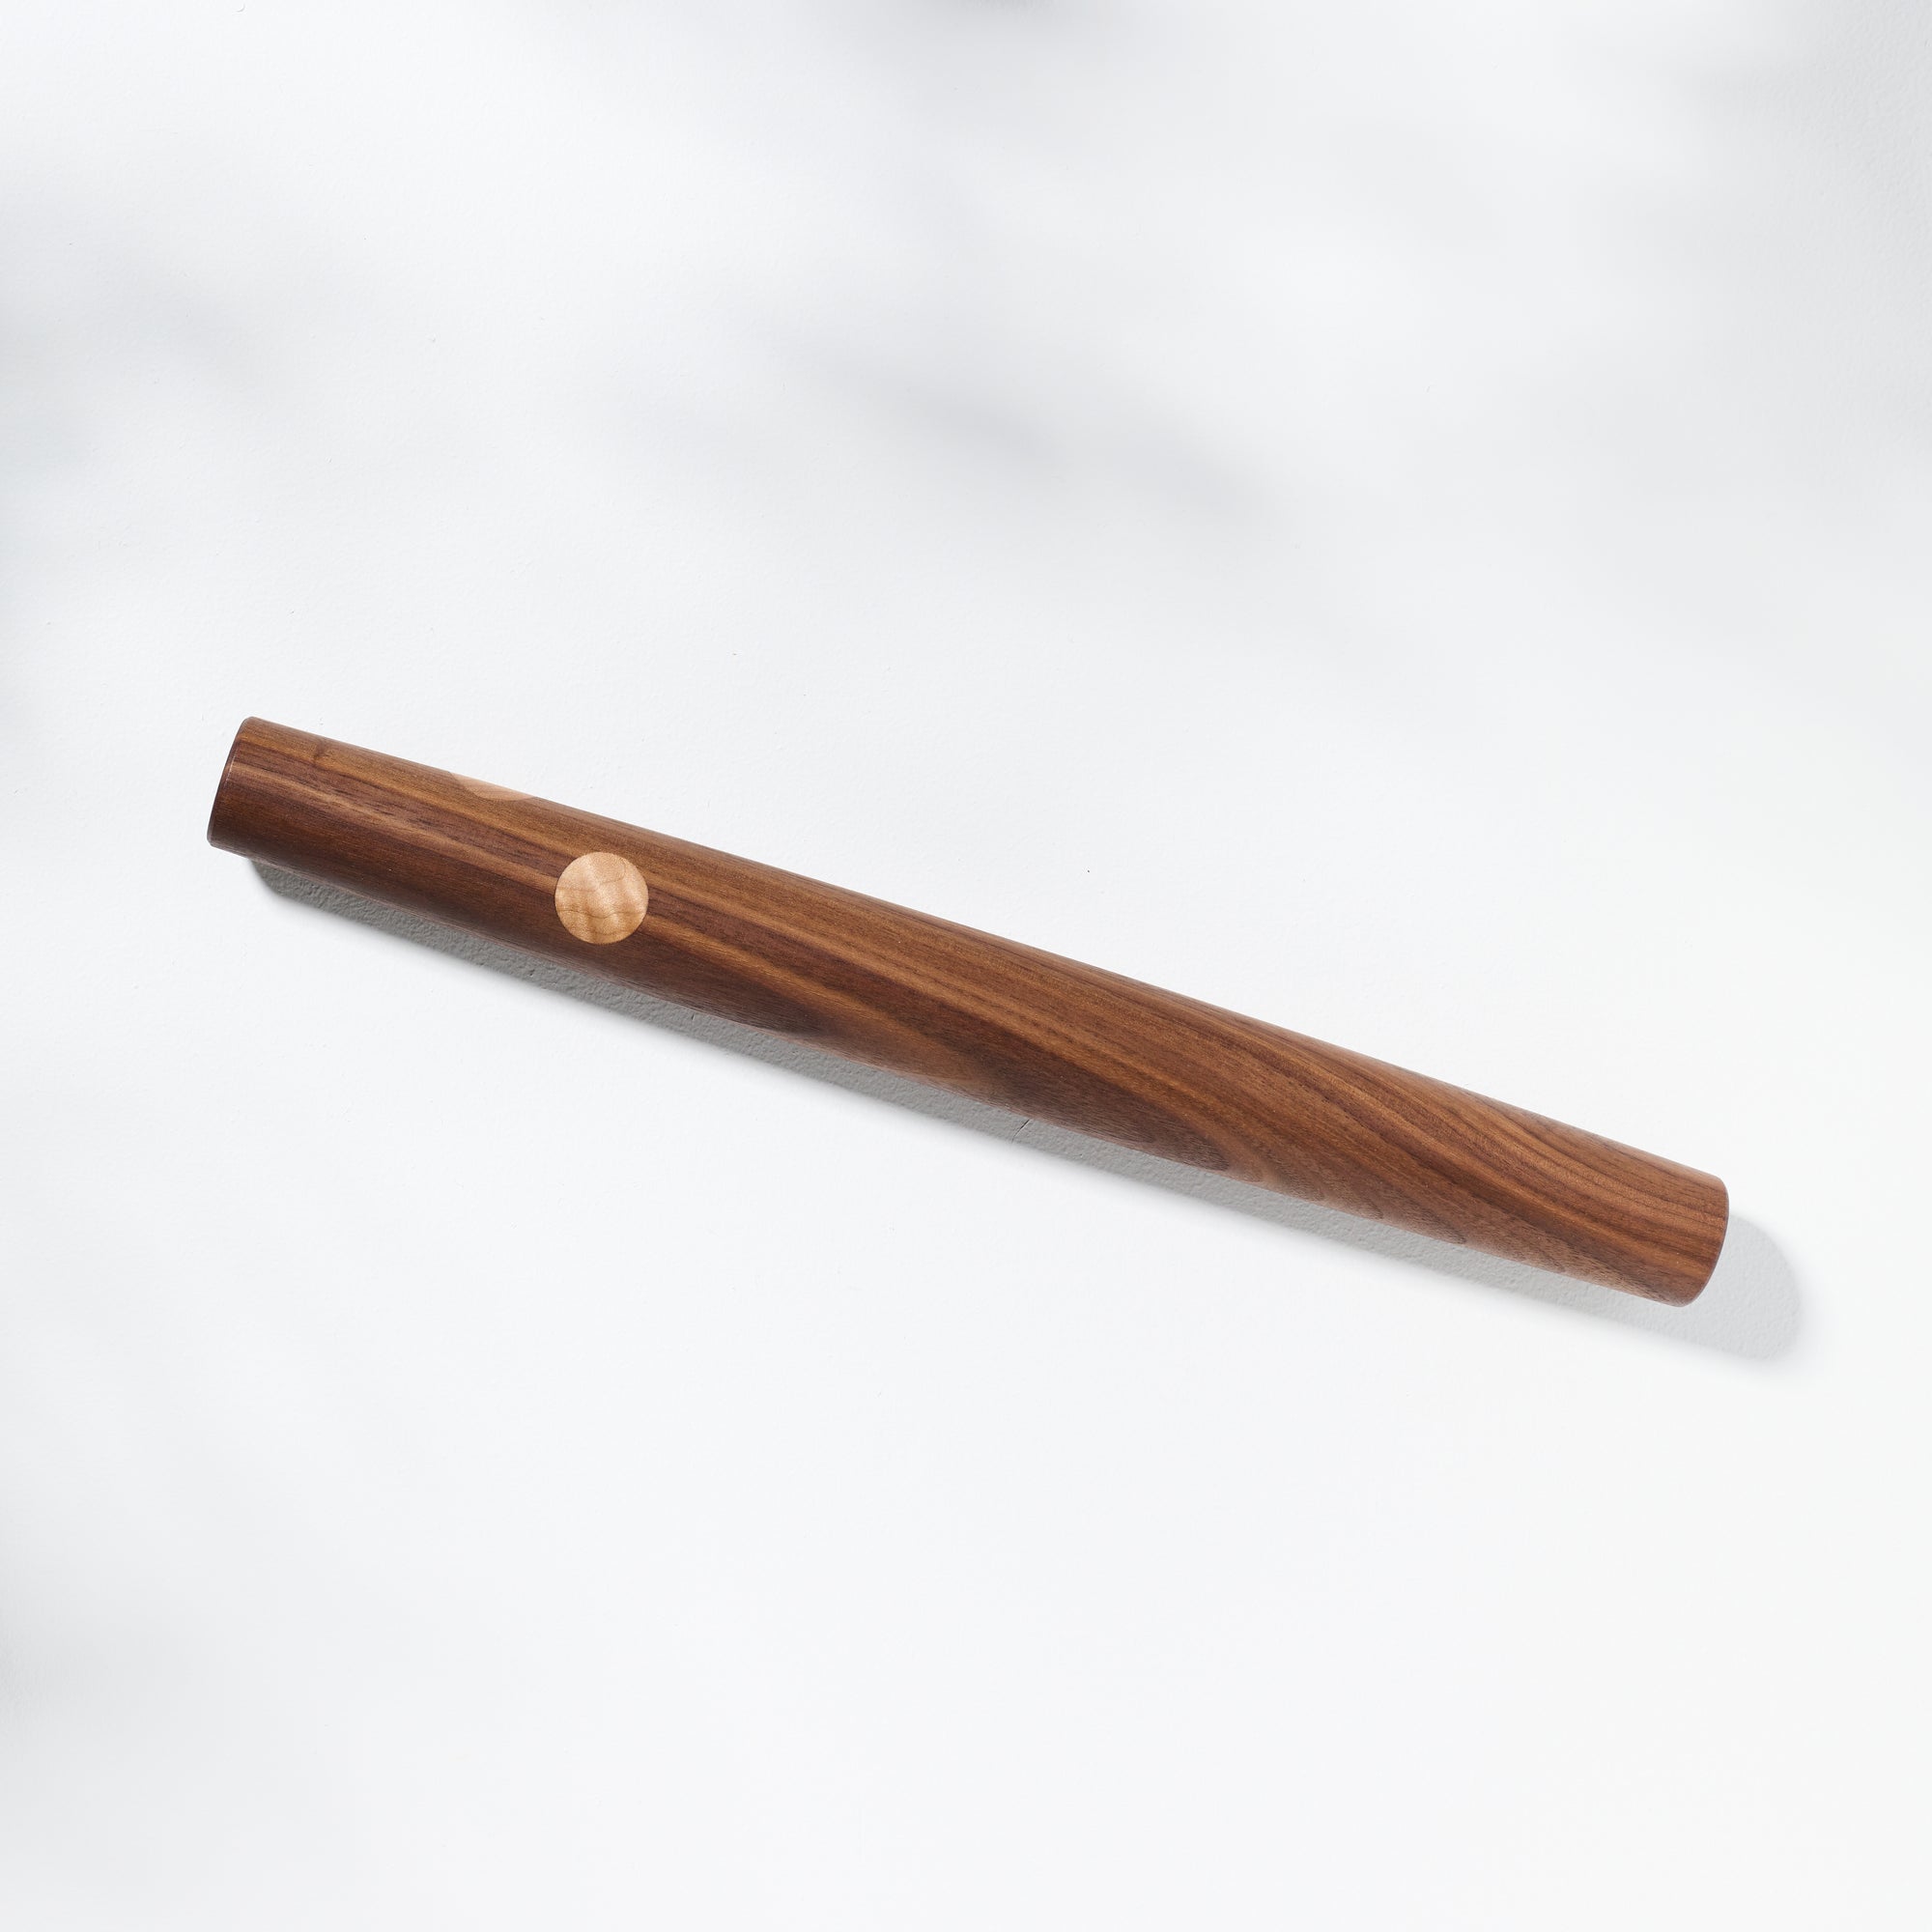 Hardwood French-style Rolling Pin - Elegant kitchen Tool with Polka Dot  Inlays